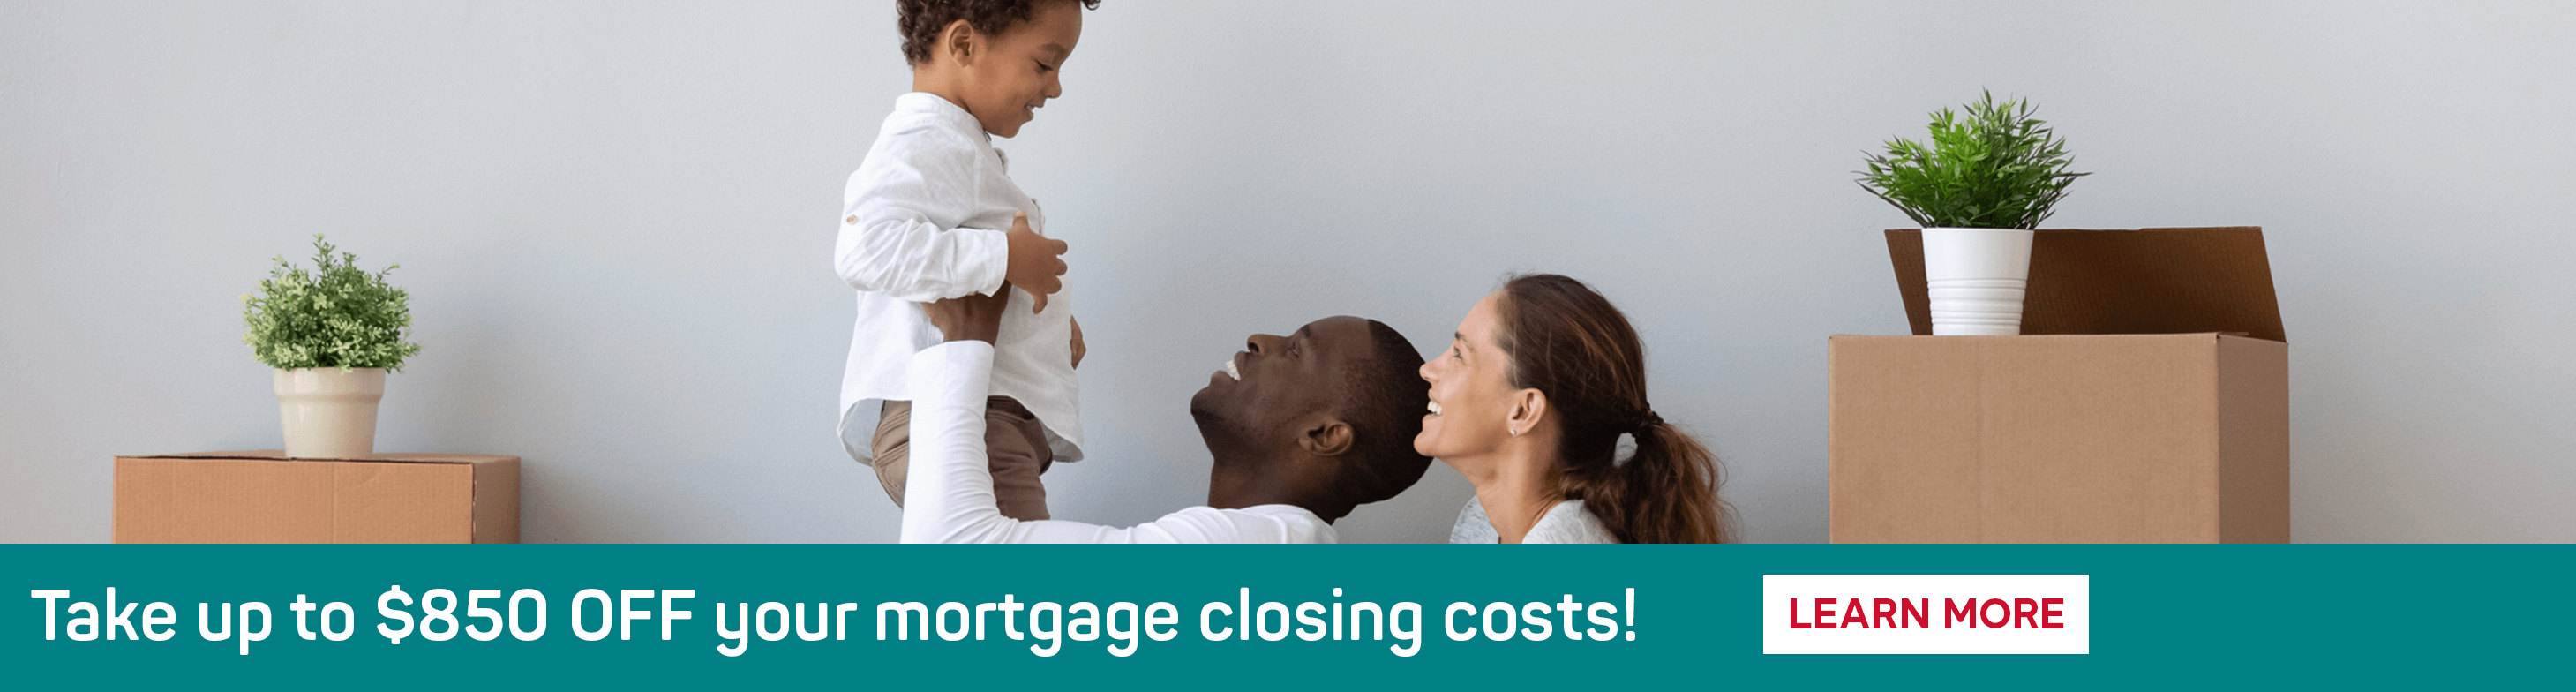 Take up to $850 off mortgage closing costs! Learn More